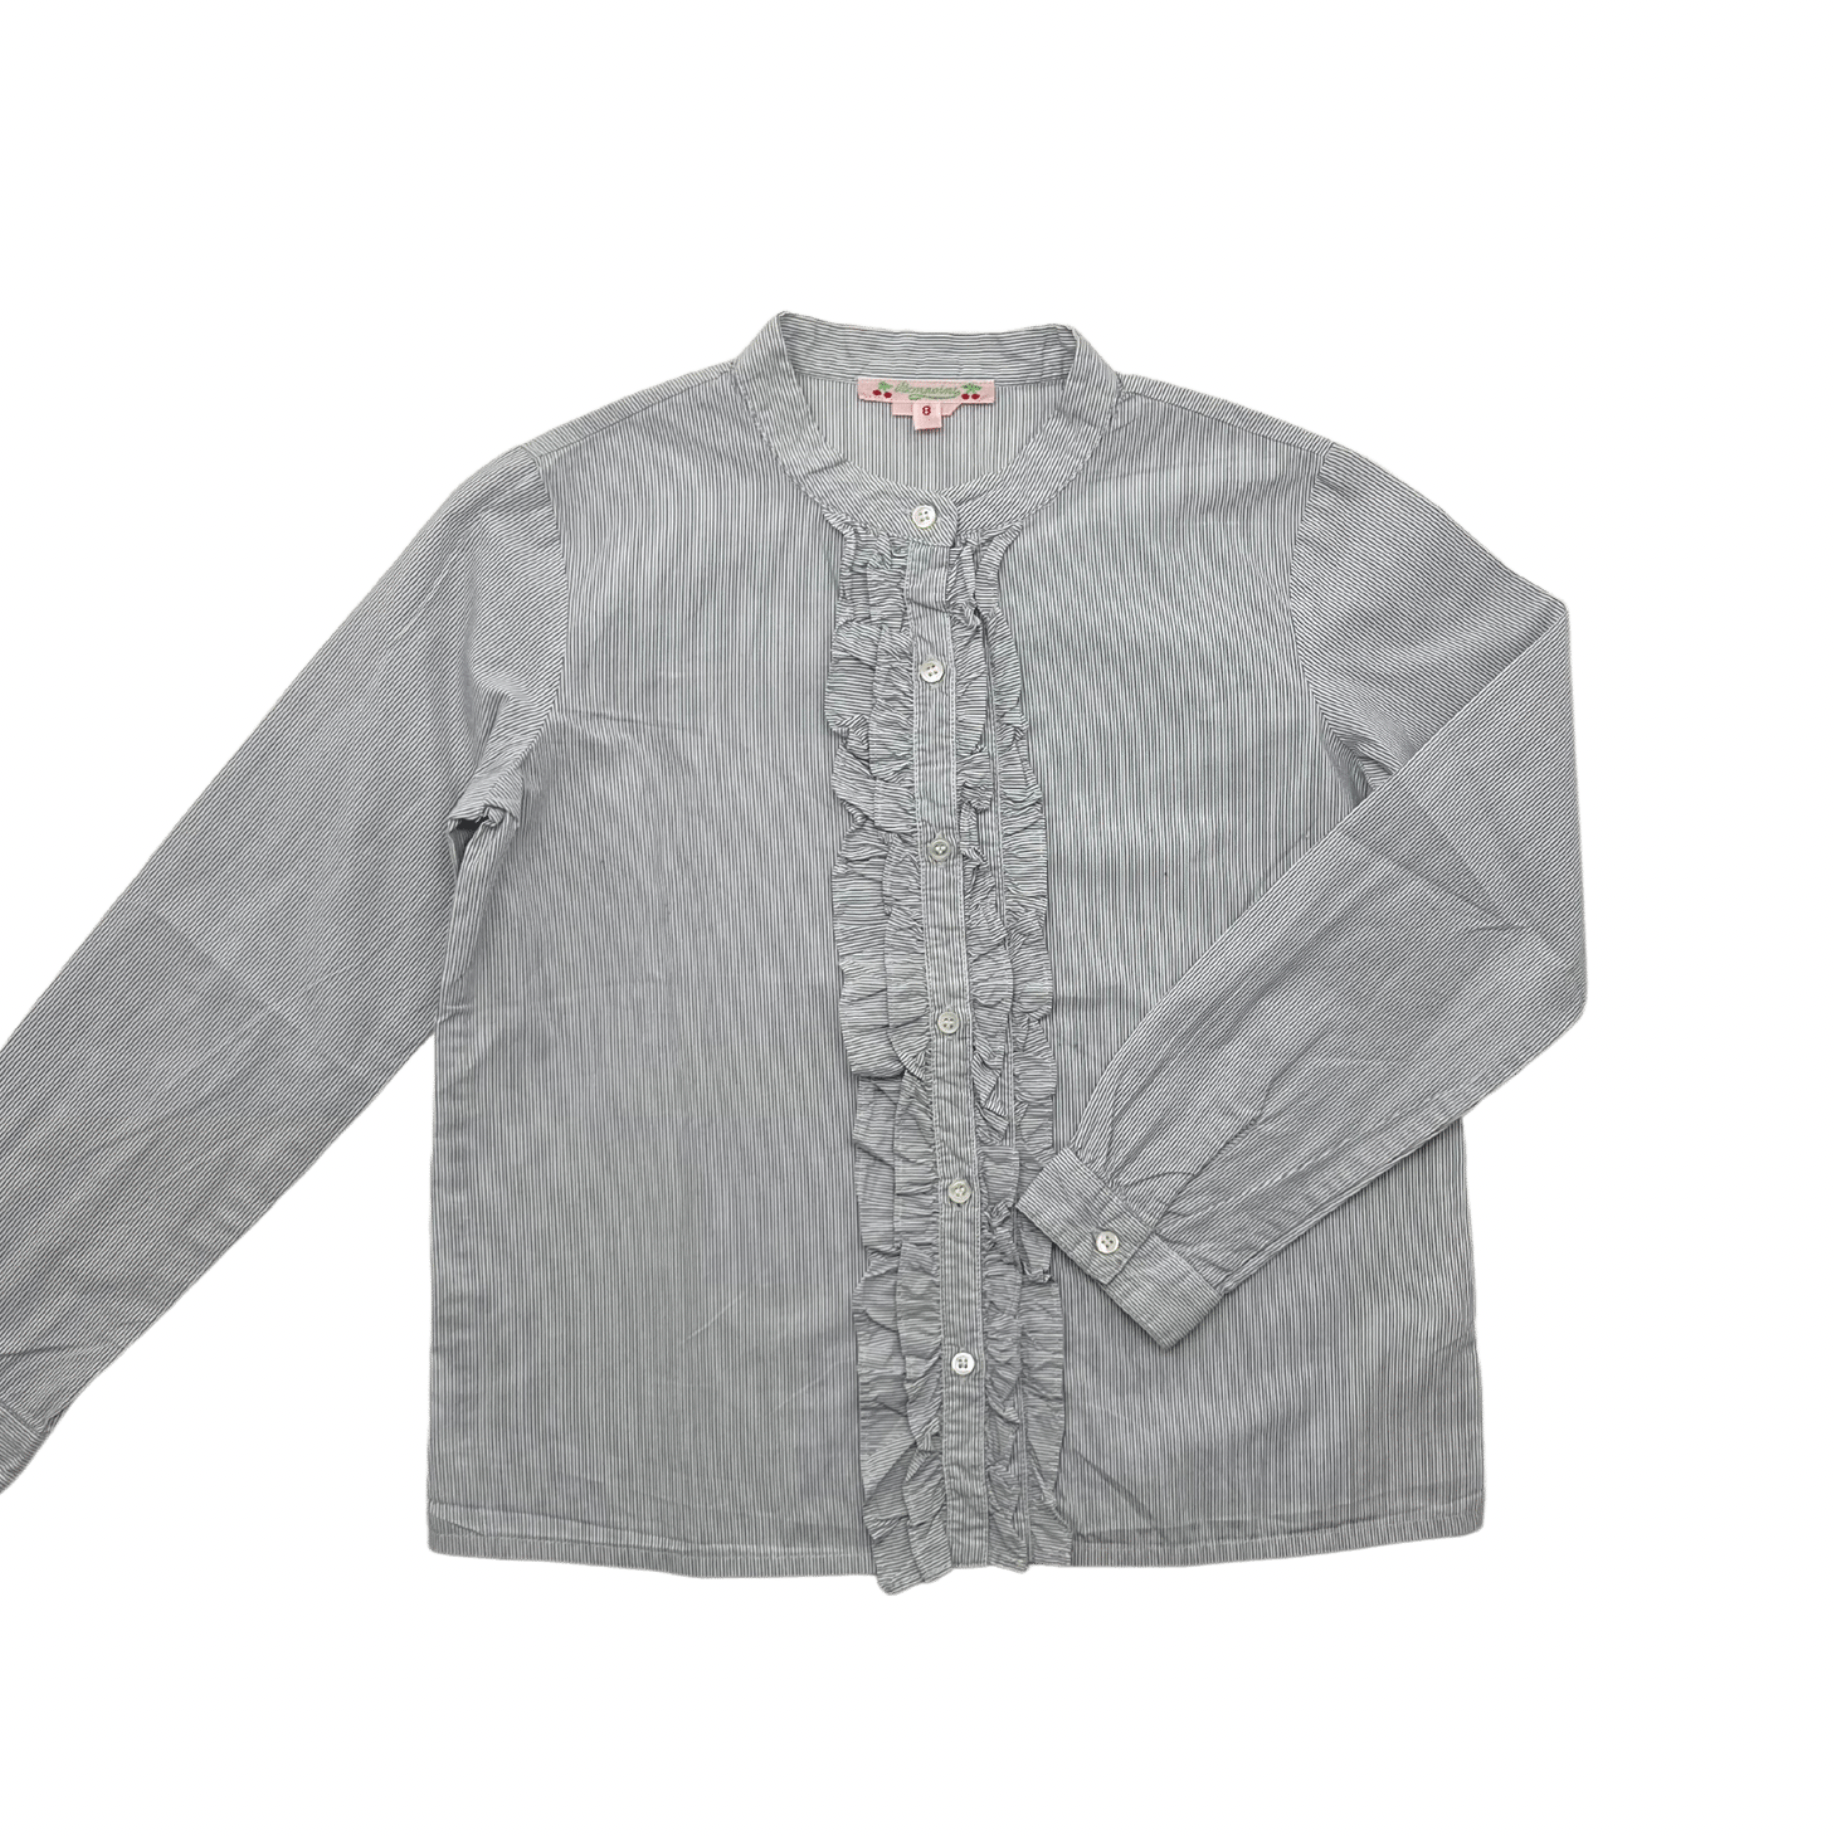 BONPOINT - Blouse - 8 years old